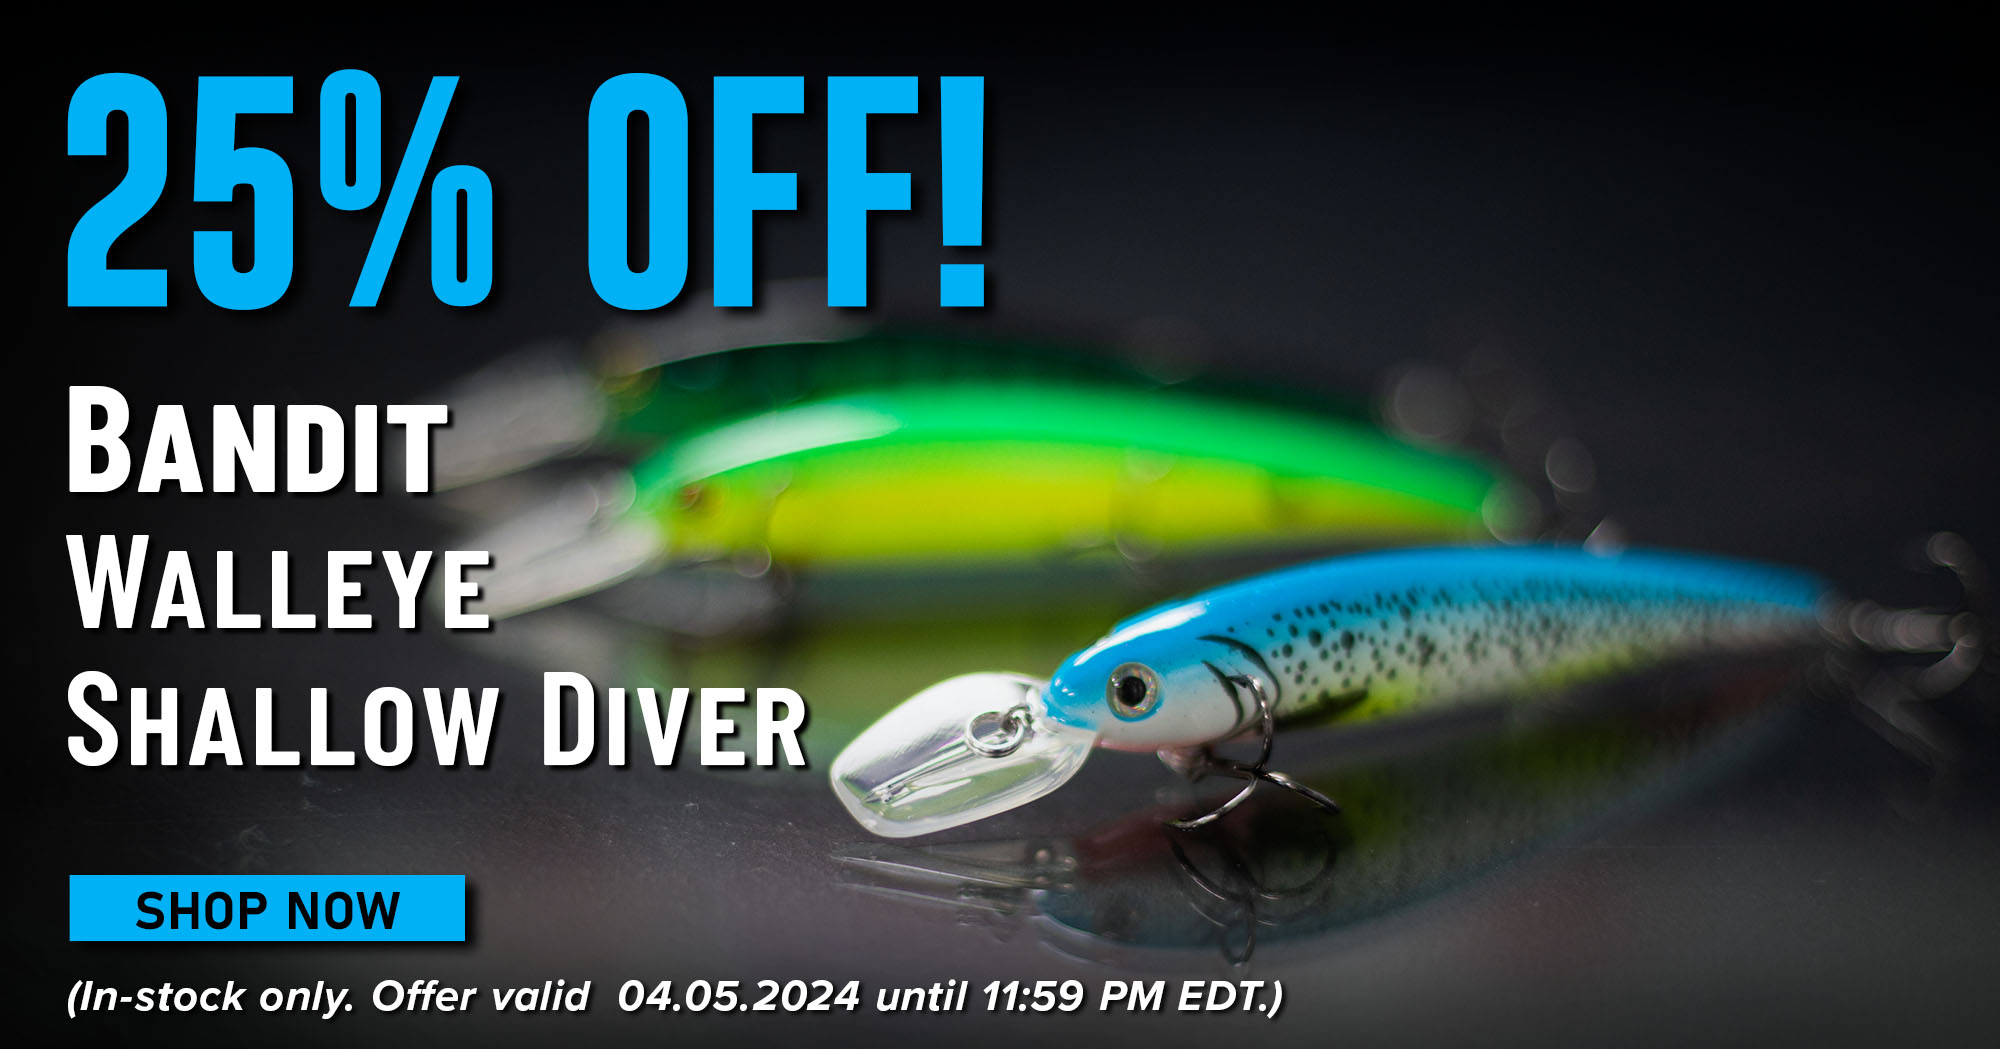 25% off - Bandit Walleye Cranks & So Much More! - Fish USA